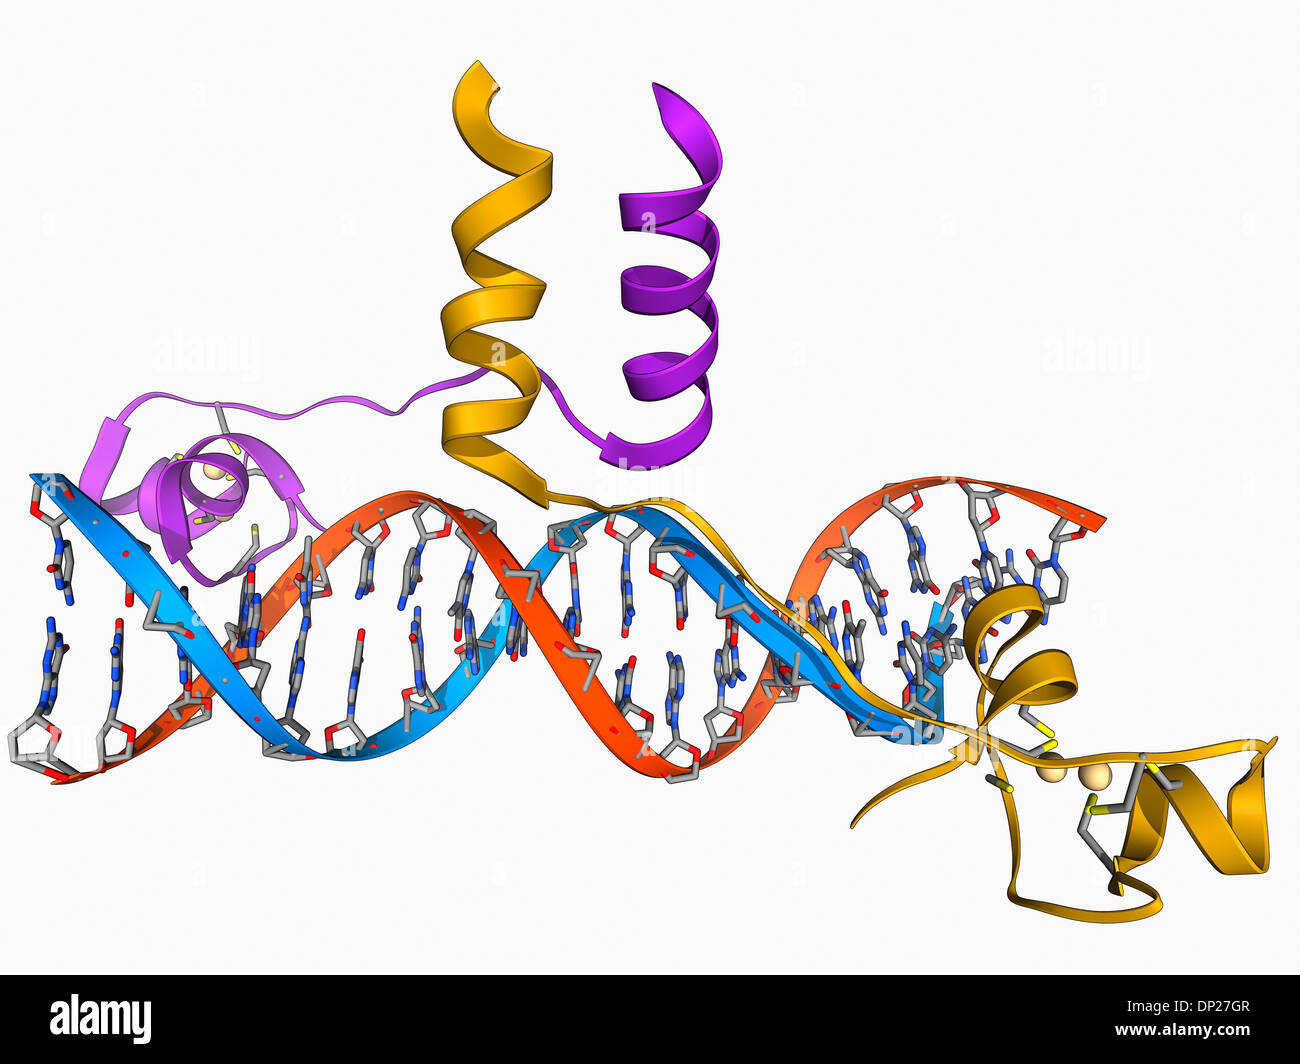 Yeast DNA recognition, molecular model Stock Photo